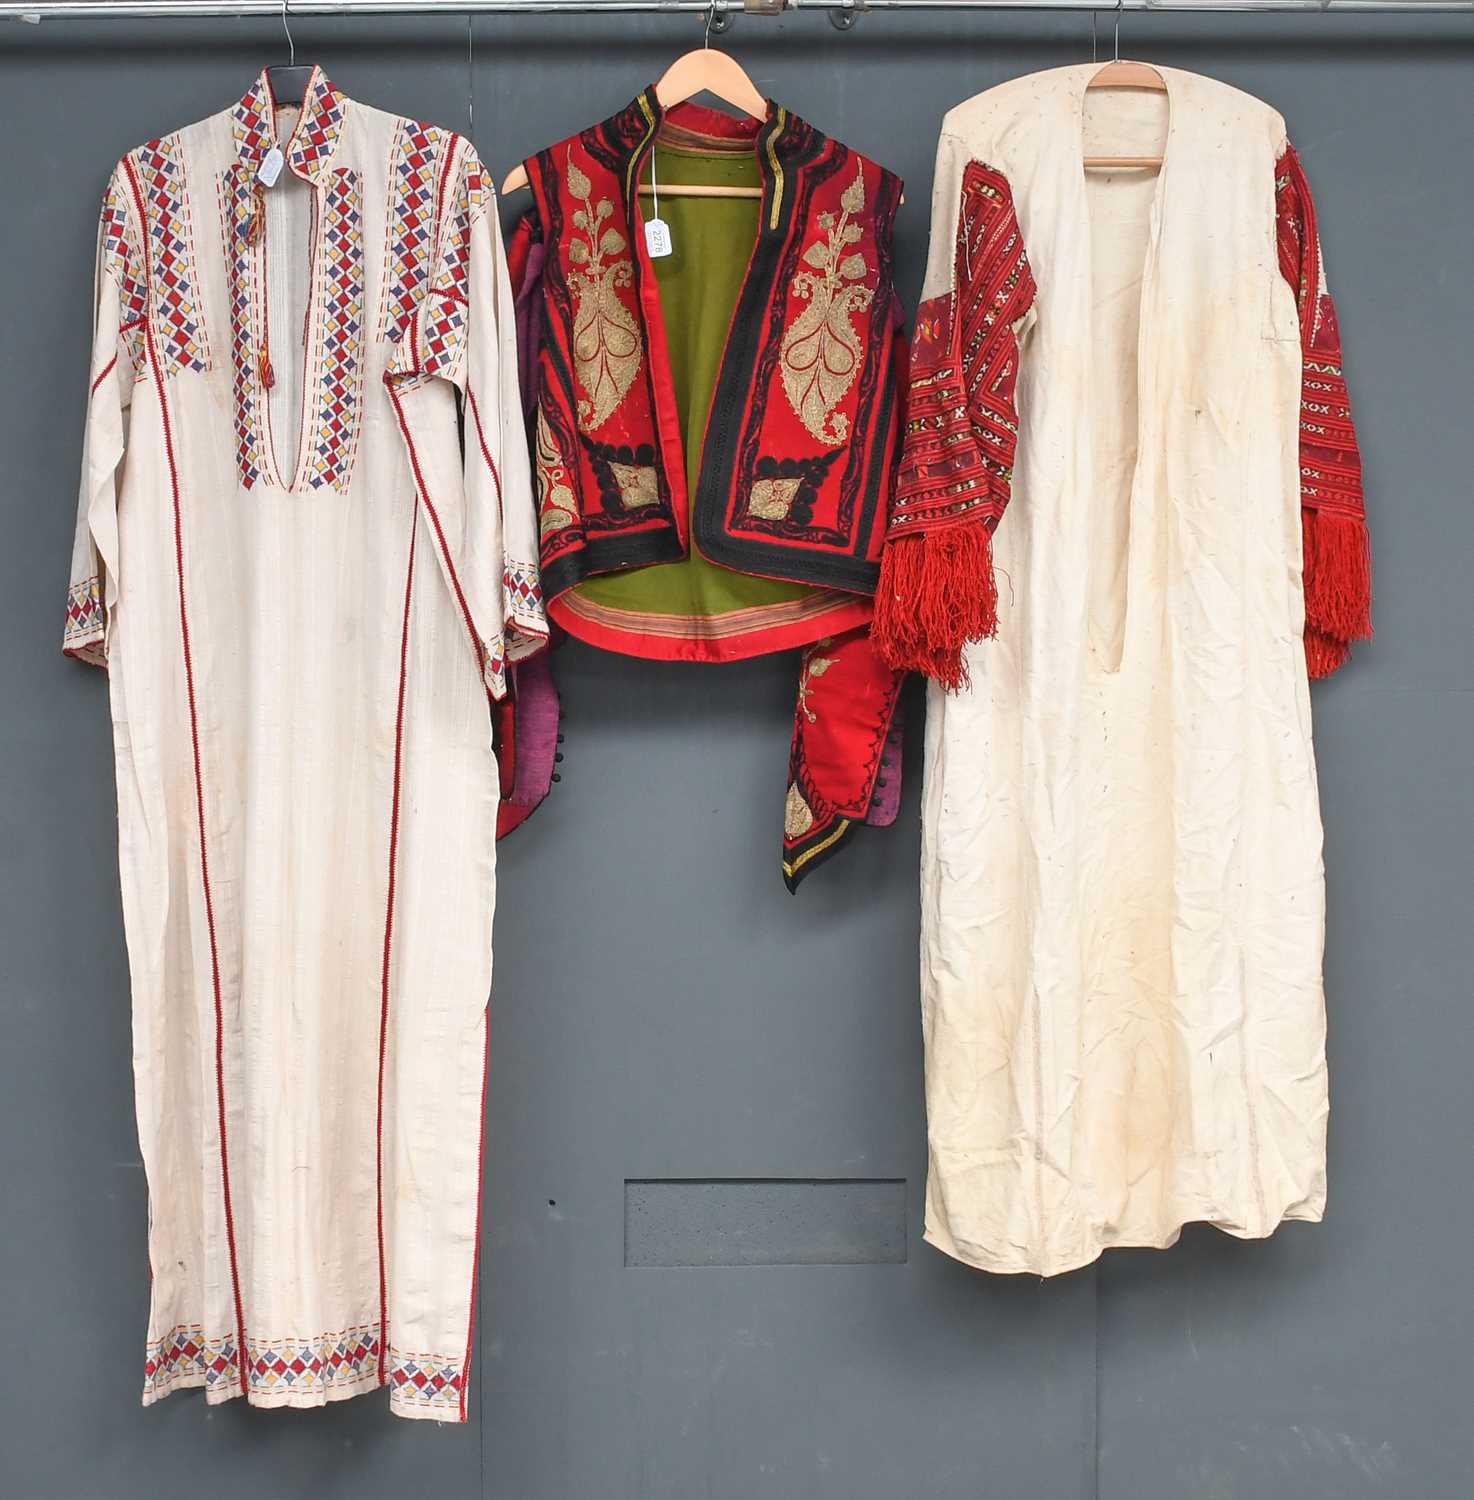 Late 19th/Early 20th Century Ottoman/Albanian Costumes comprising two cream cotton long sleeve robes